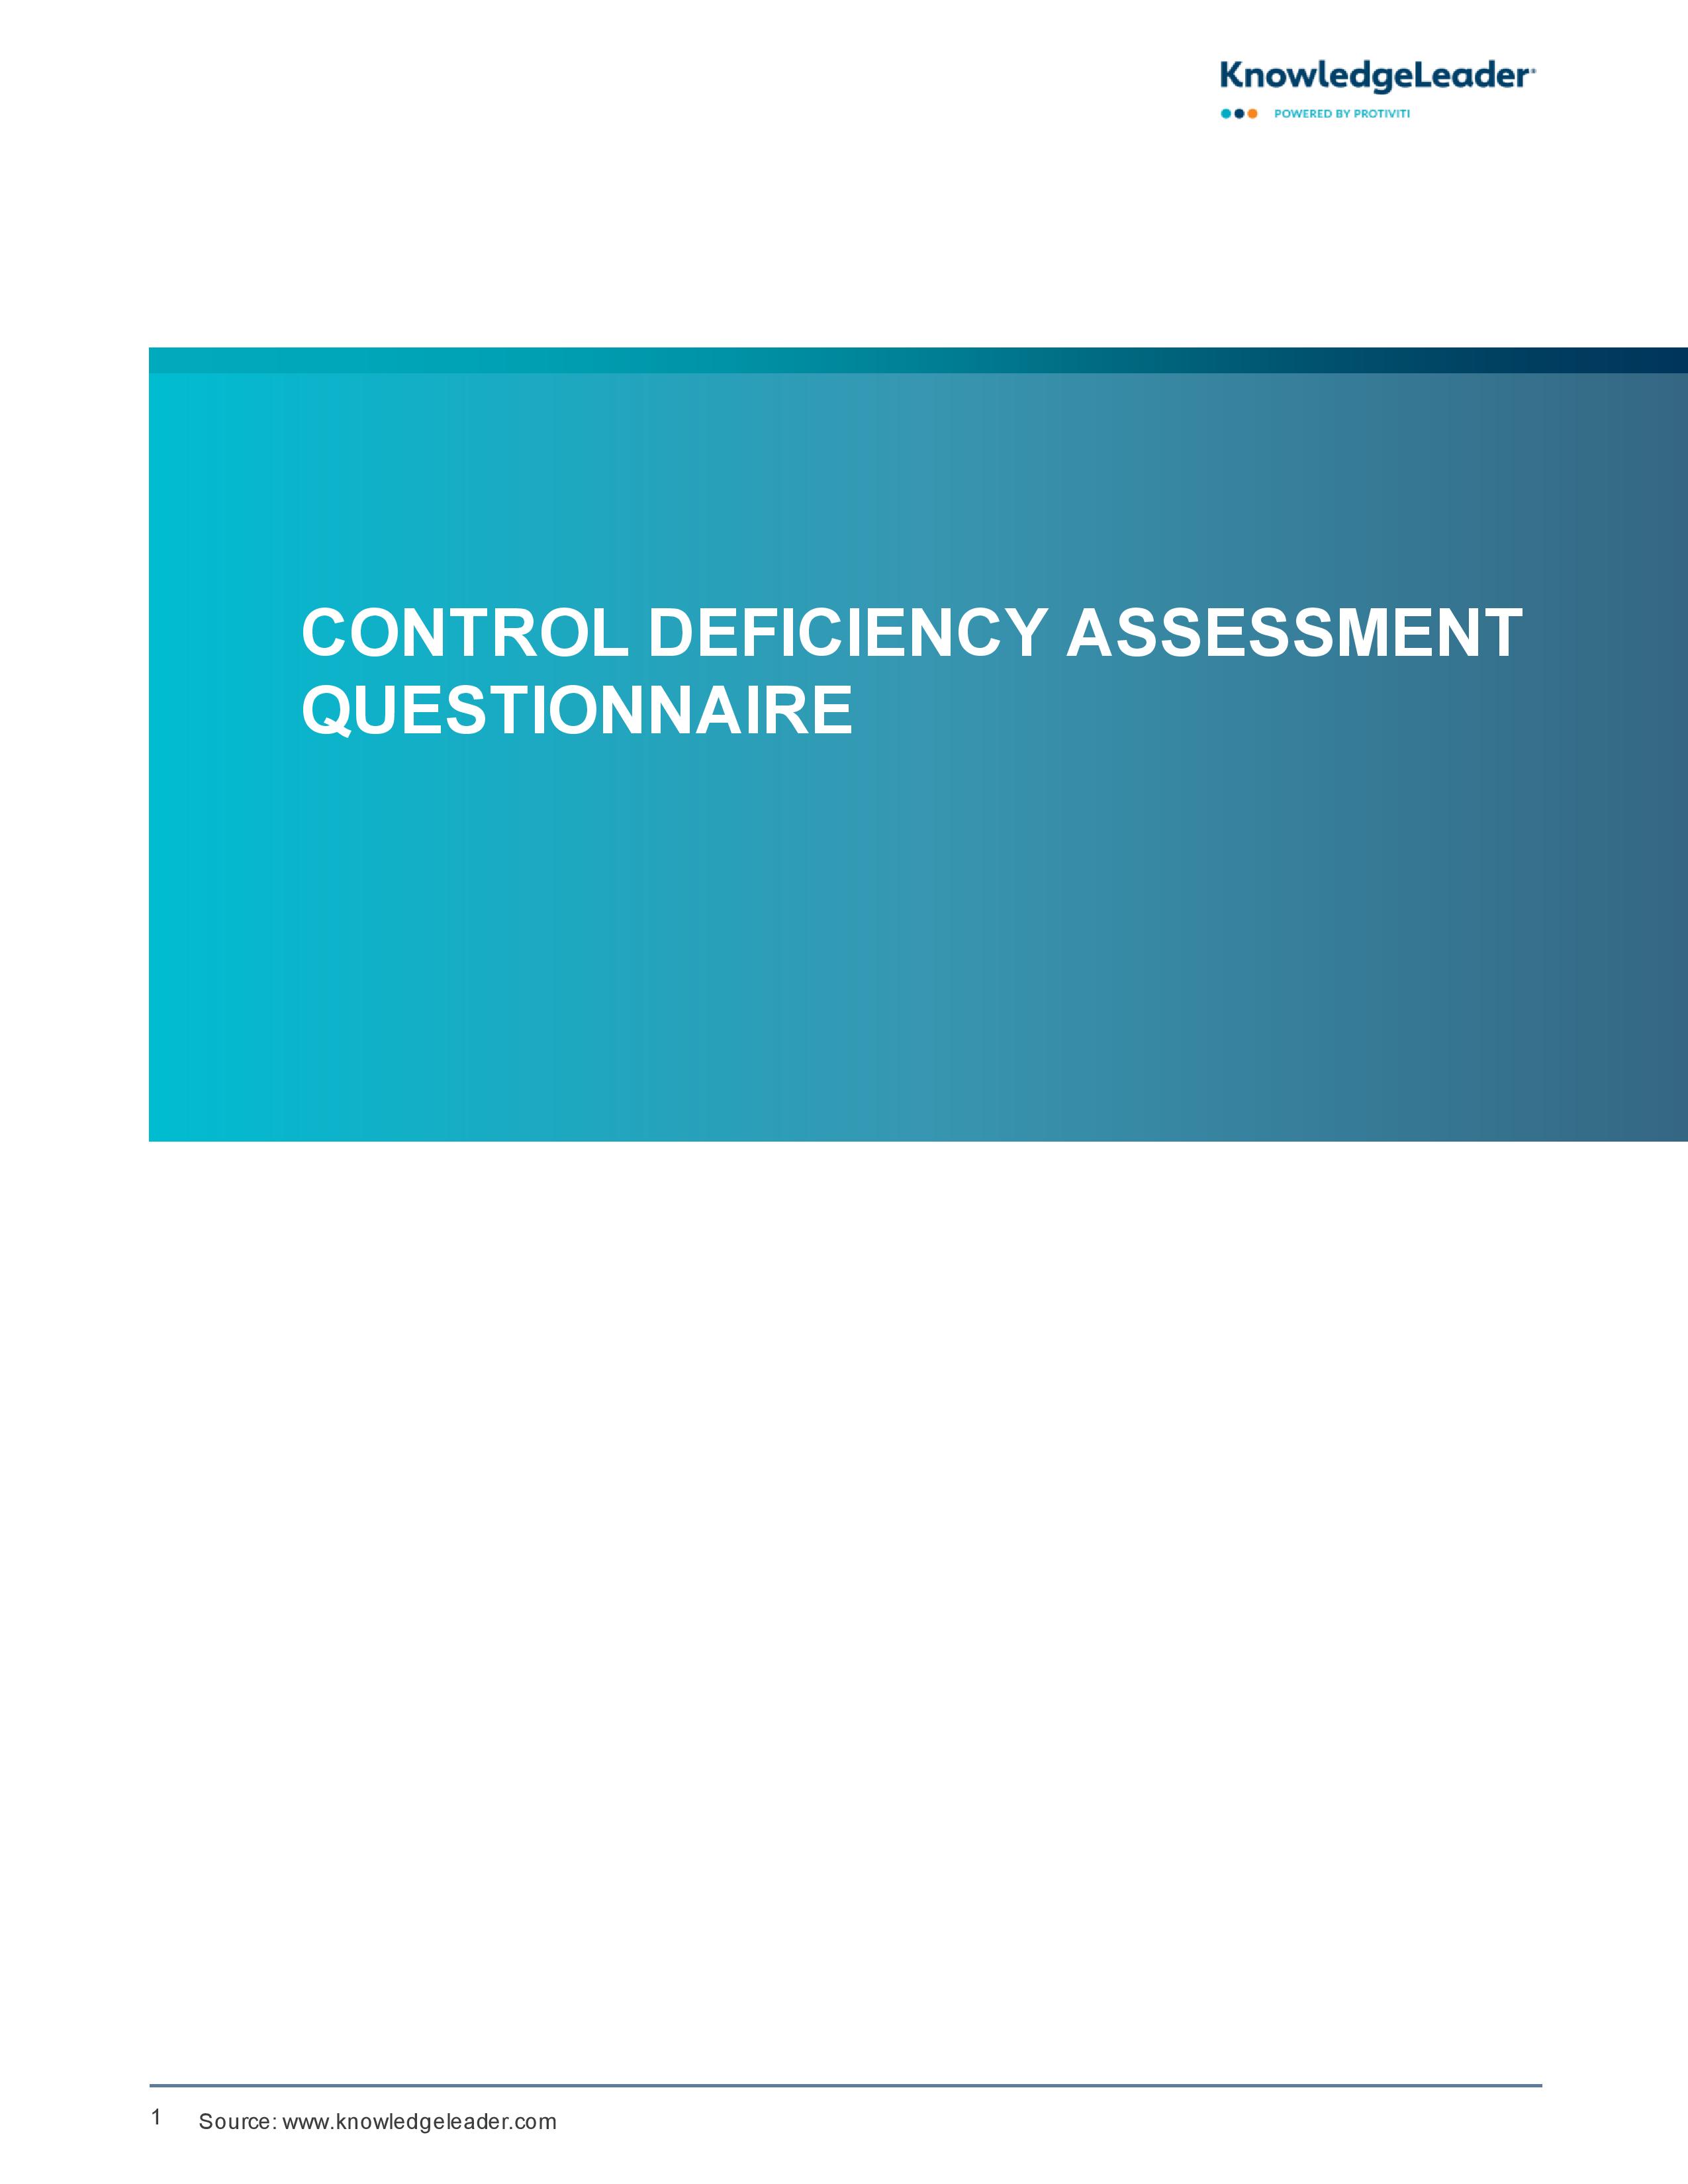 Screenshot of the first page of Control Deficiency Assessment Questionnaire